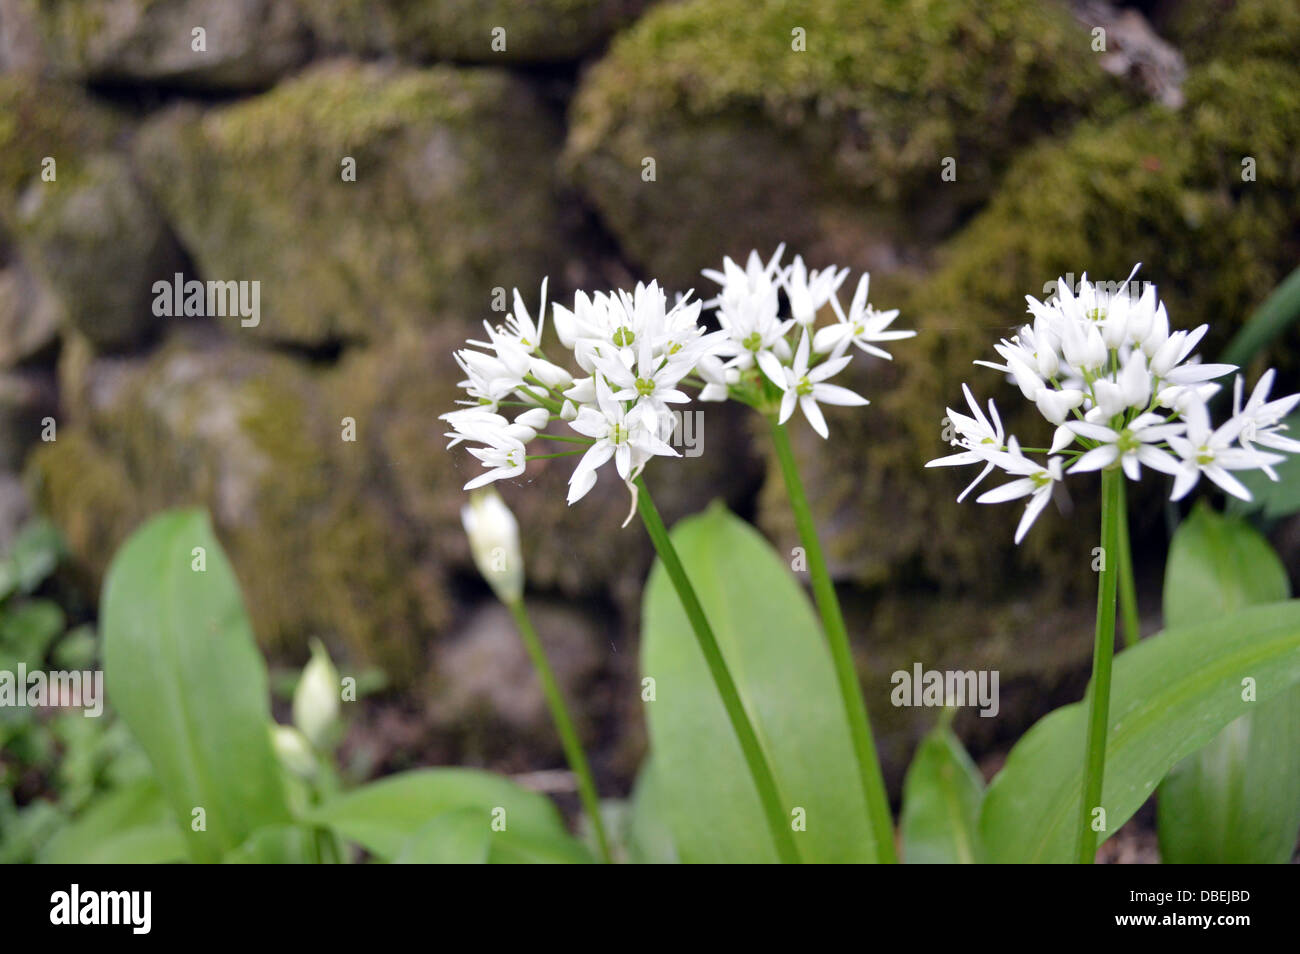 Wild Garlic Blossom next to Moss Covered Dry Stone Wall  on the Dales Way Long Distance Footpath Wharfedale Yorkshire Stock Photo